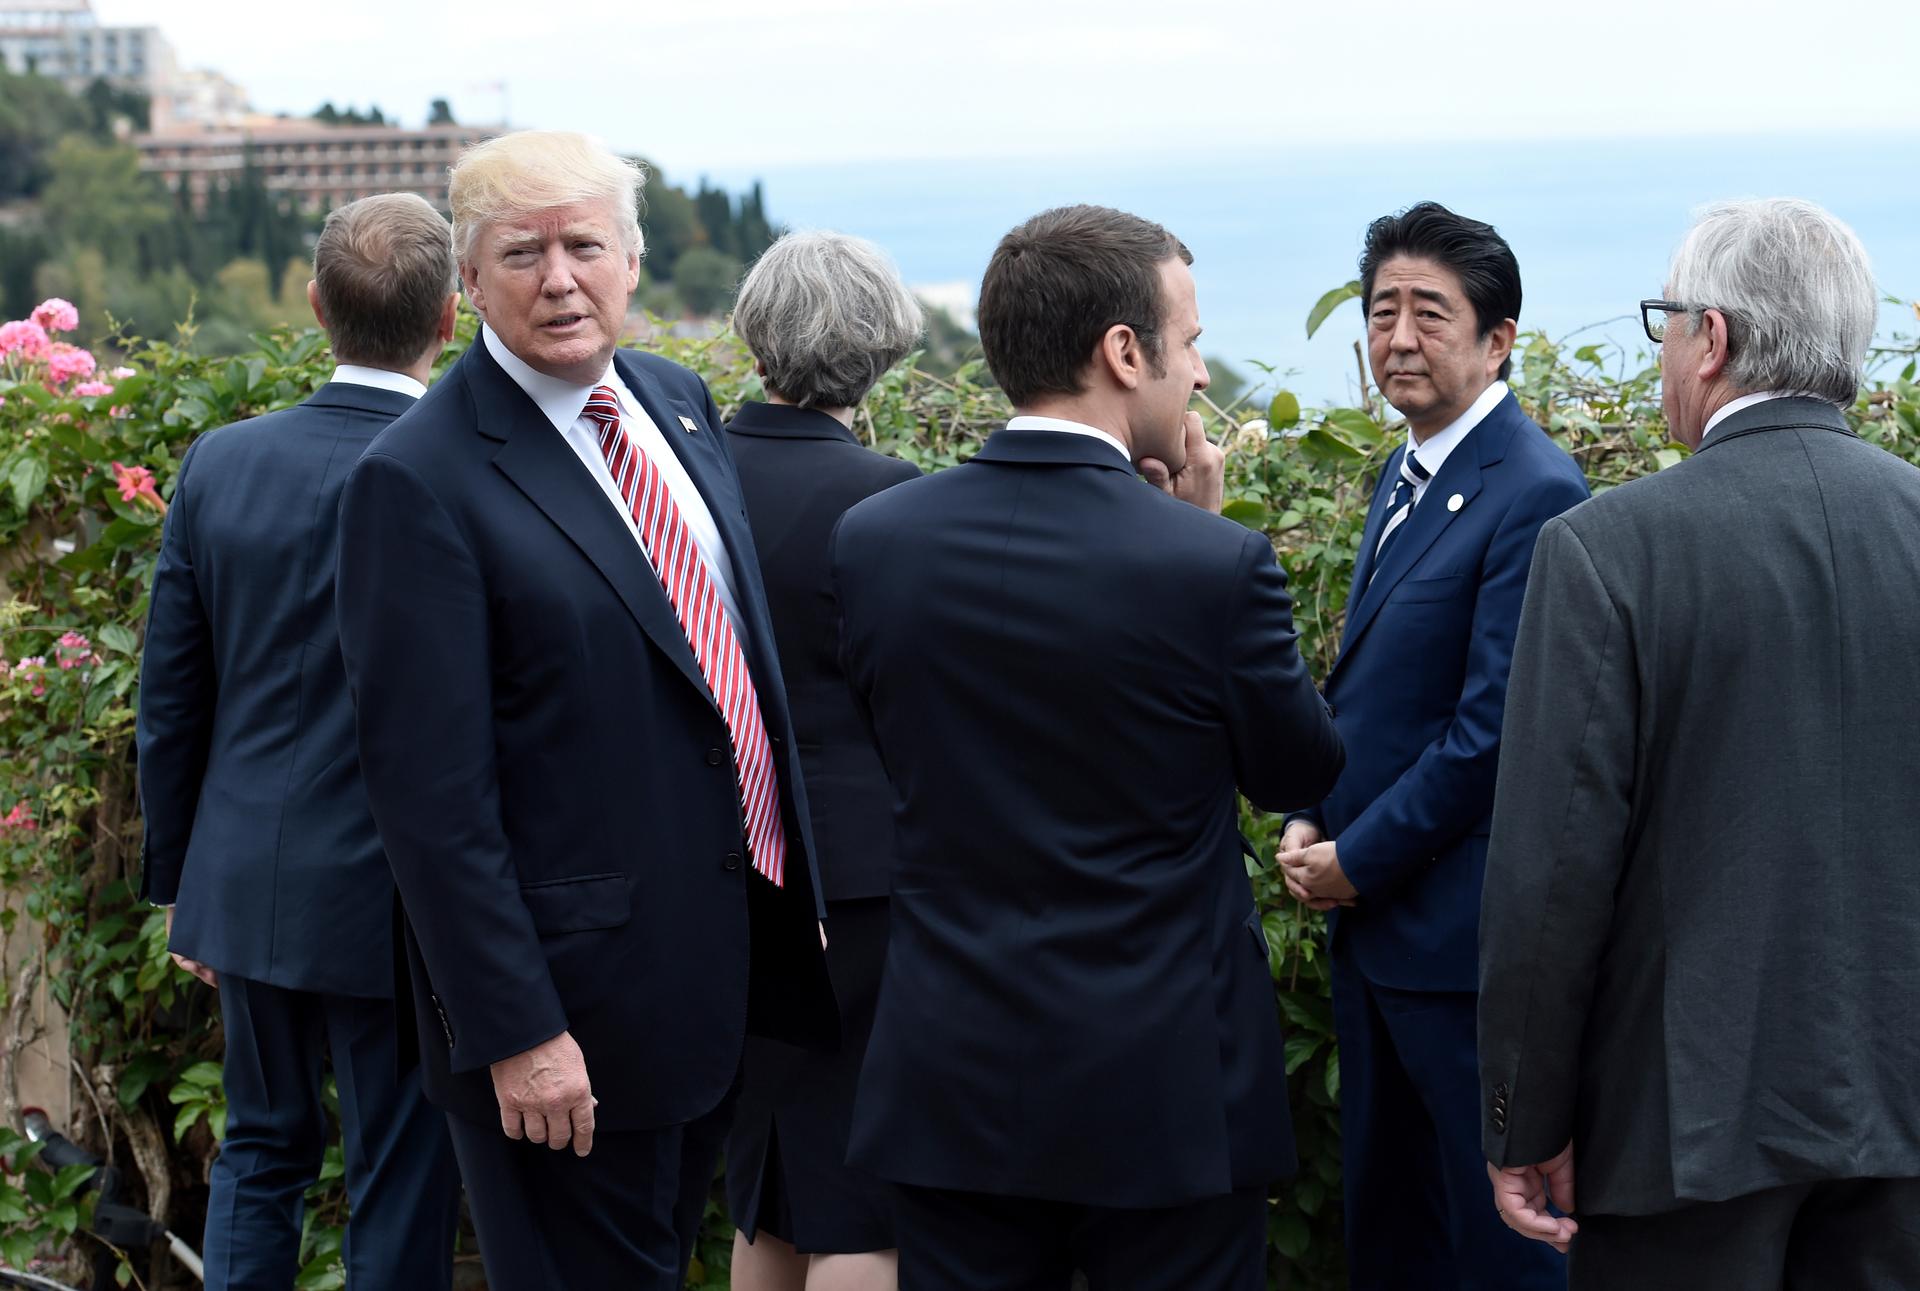 Trump turns away from President of the European Council Donald Tusk, Britain's Prime Minister Theresa May, French President Emmanuel Macron, Japanese Prime Minister Shinzo Abe and President of the European Commission Jean-Claude Juncker.